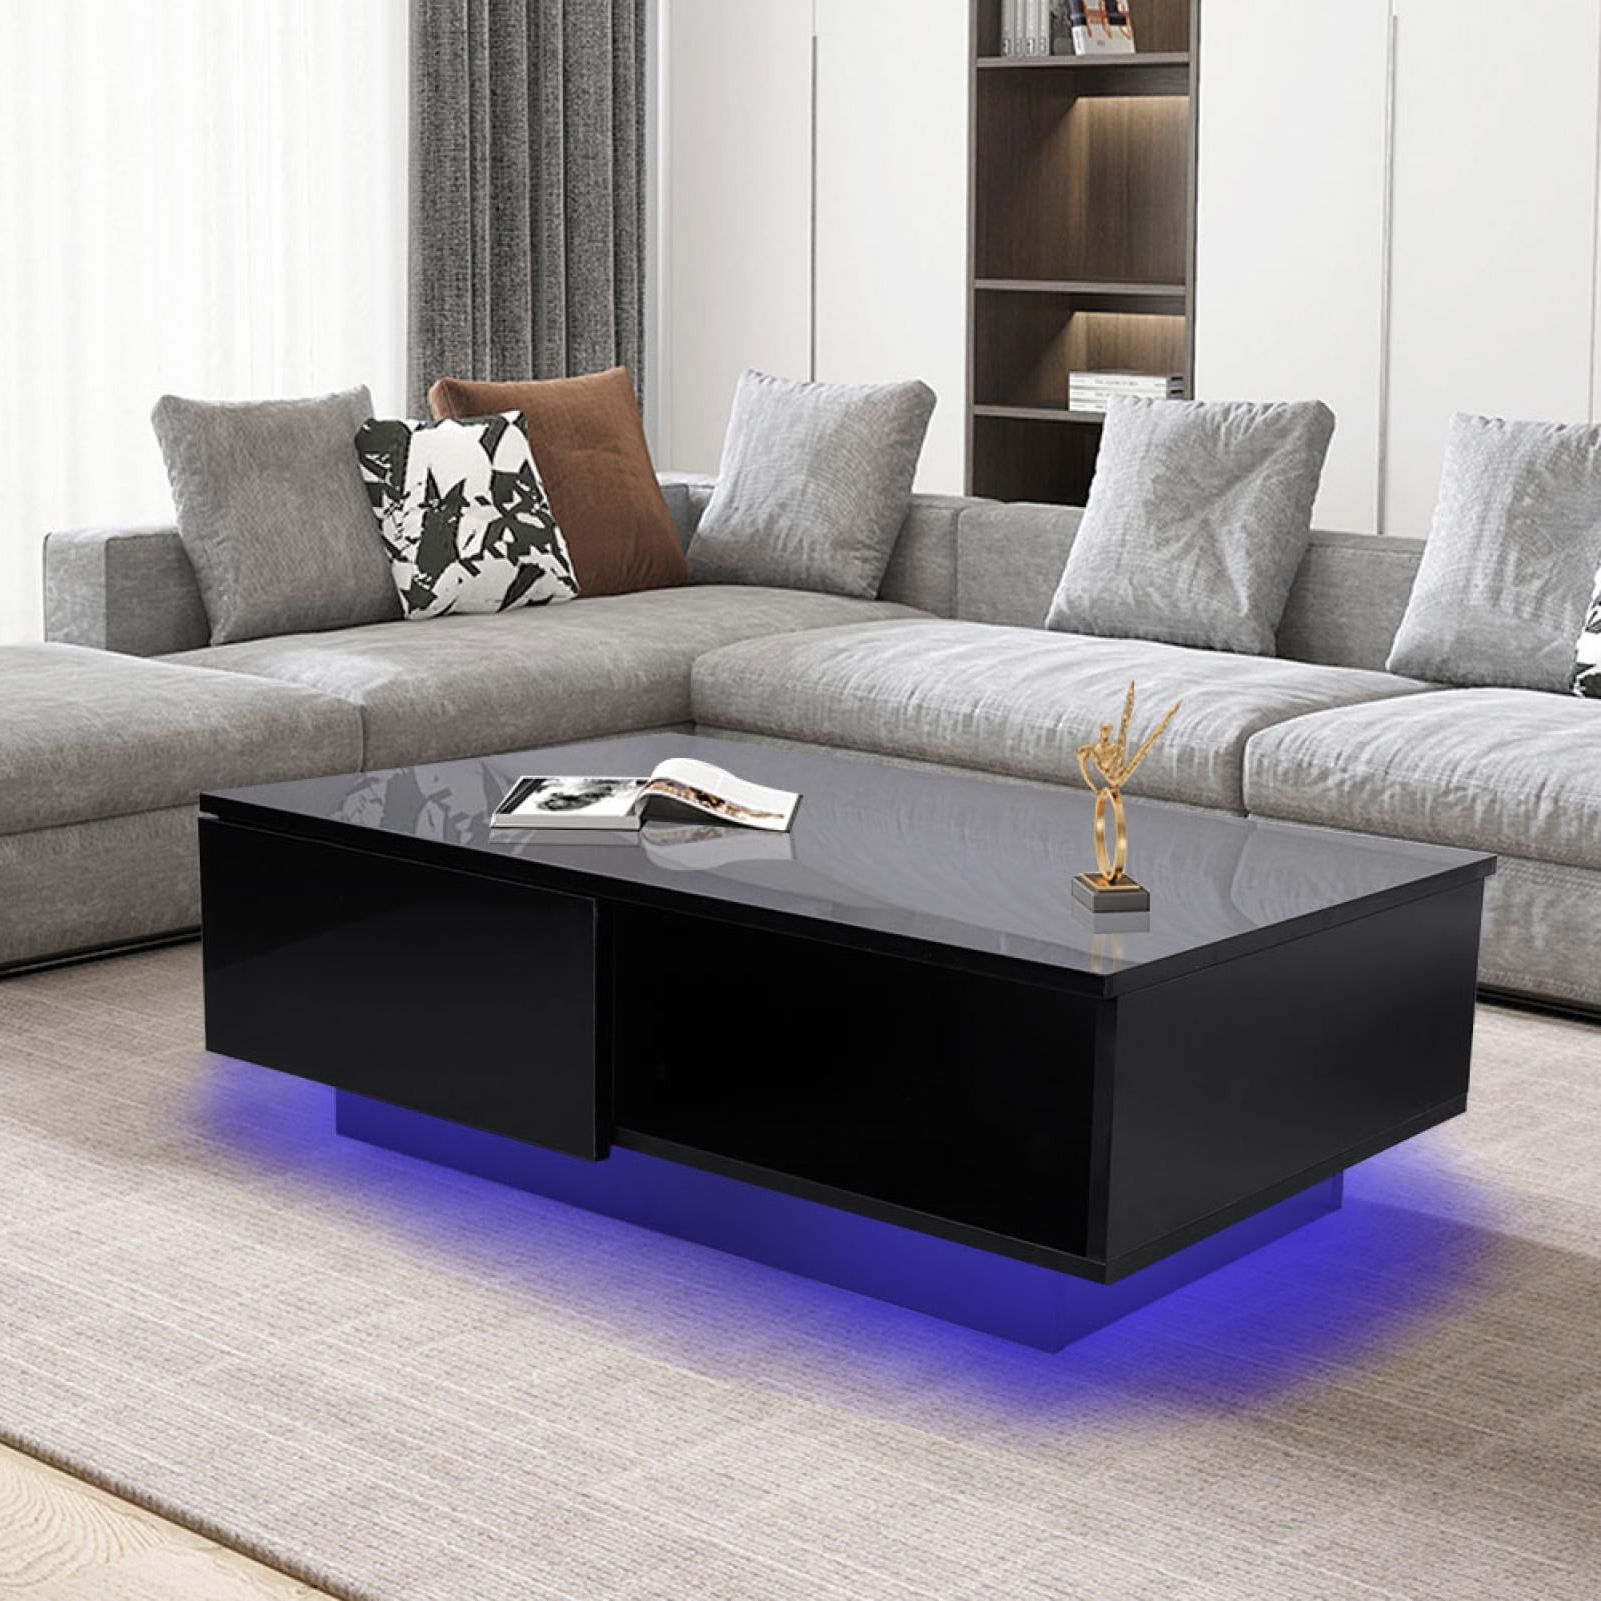 Ebtools Rectangle Led Coffee Table, Black Modern High Gloss Furniture Throughout Coffee Tables With Led Lights (Gallery 5 of 20)